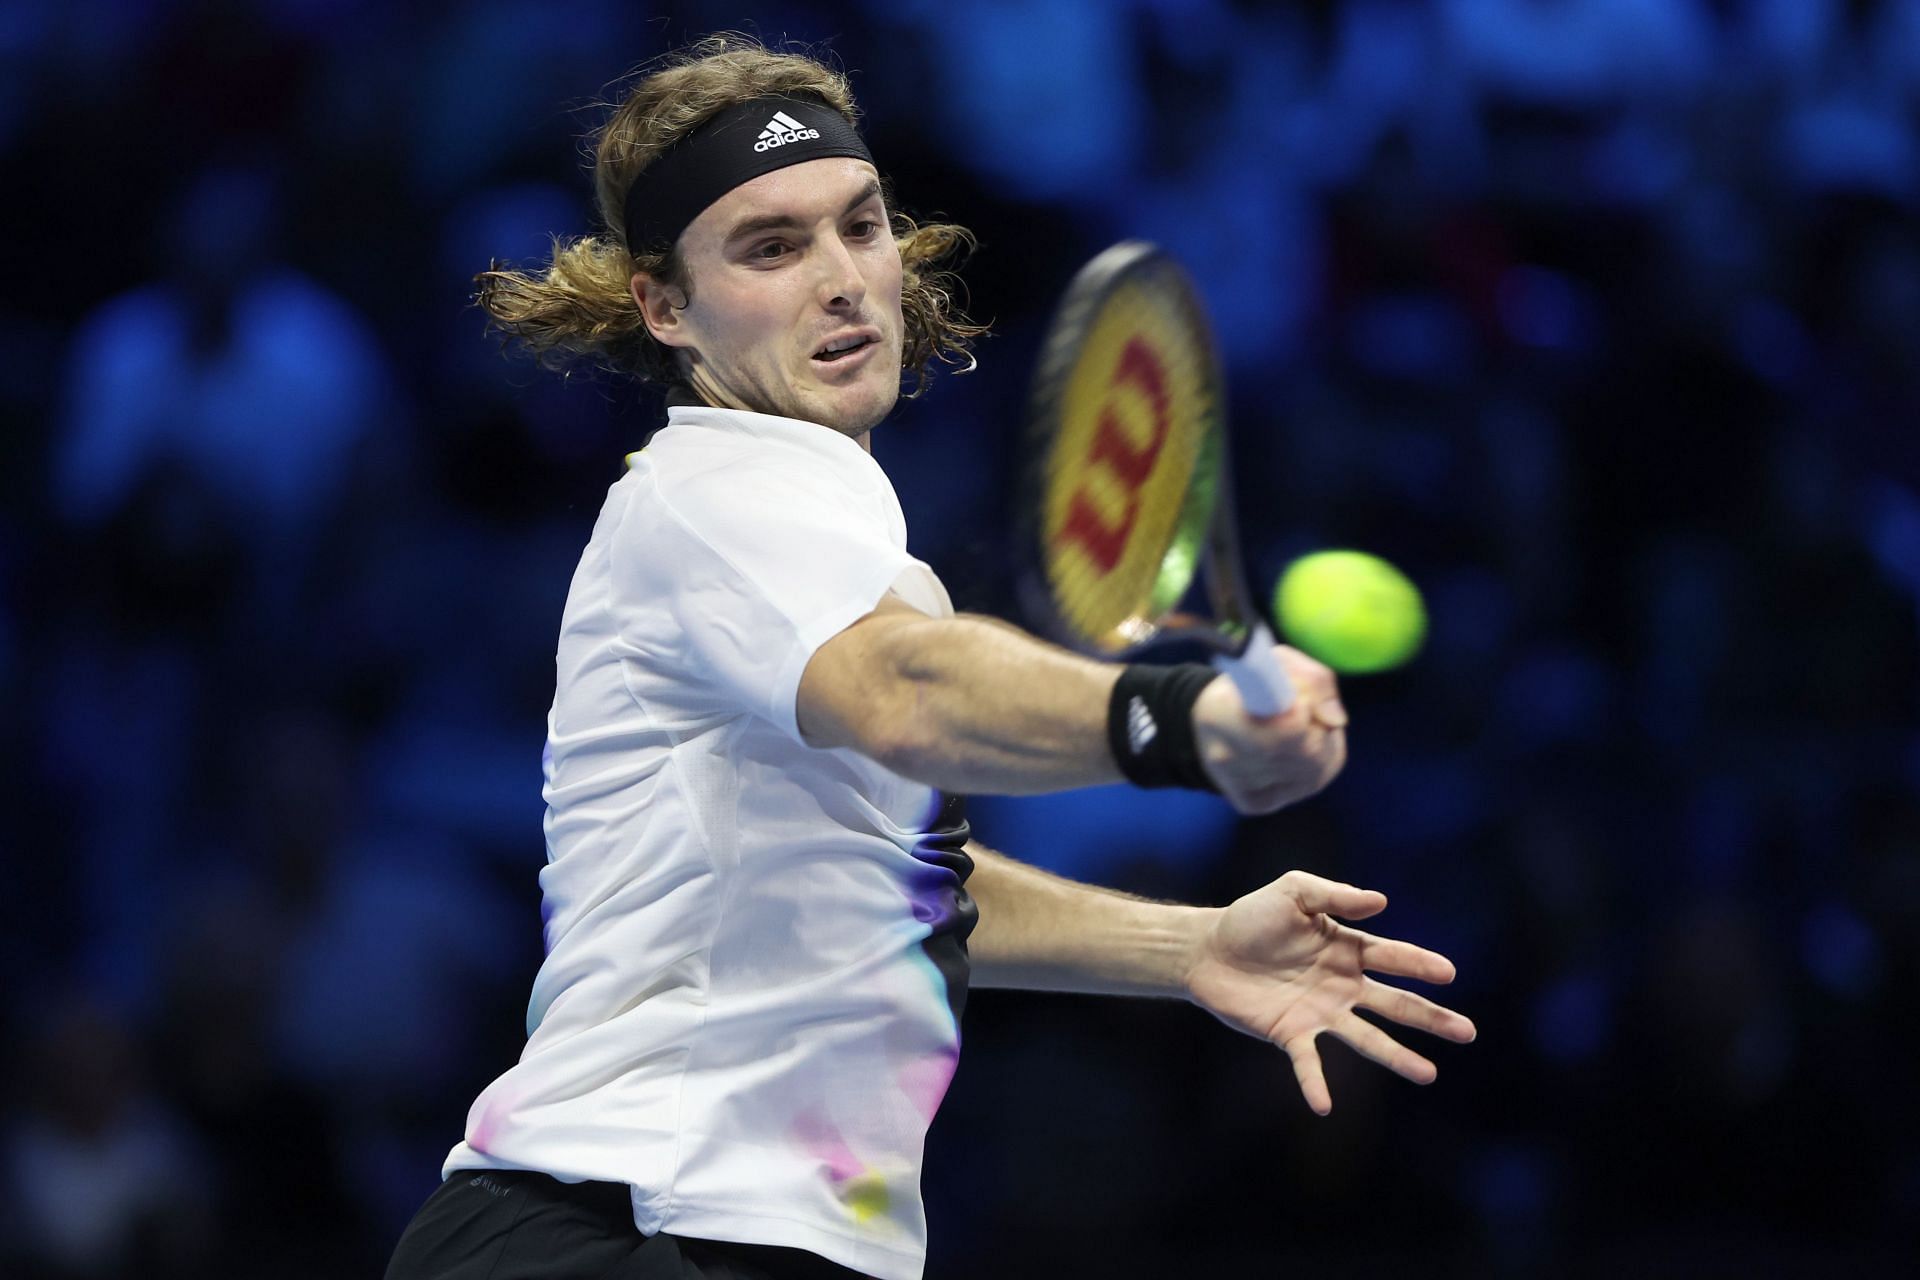 Stefanos Tsitsipas during the Nitto ATP Finals